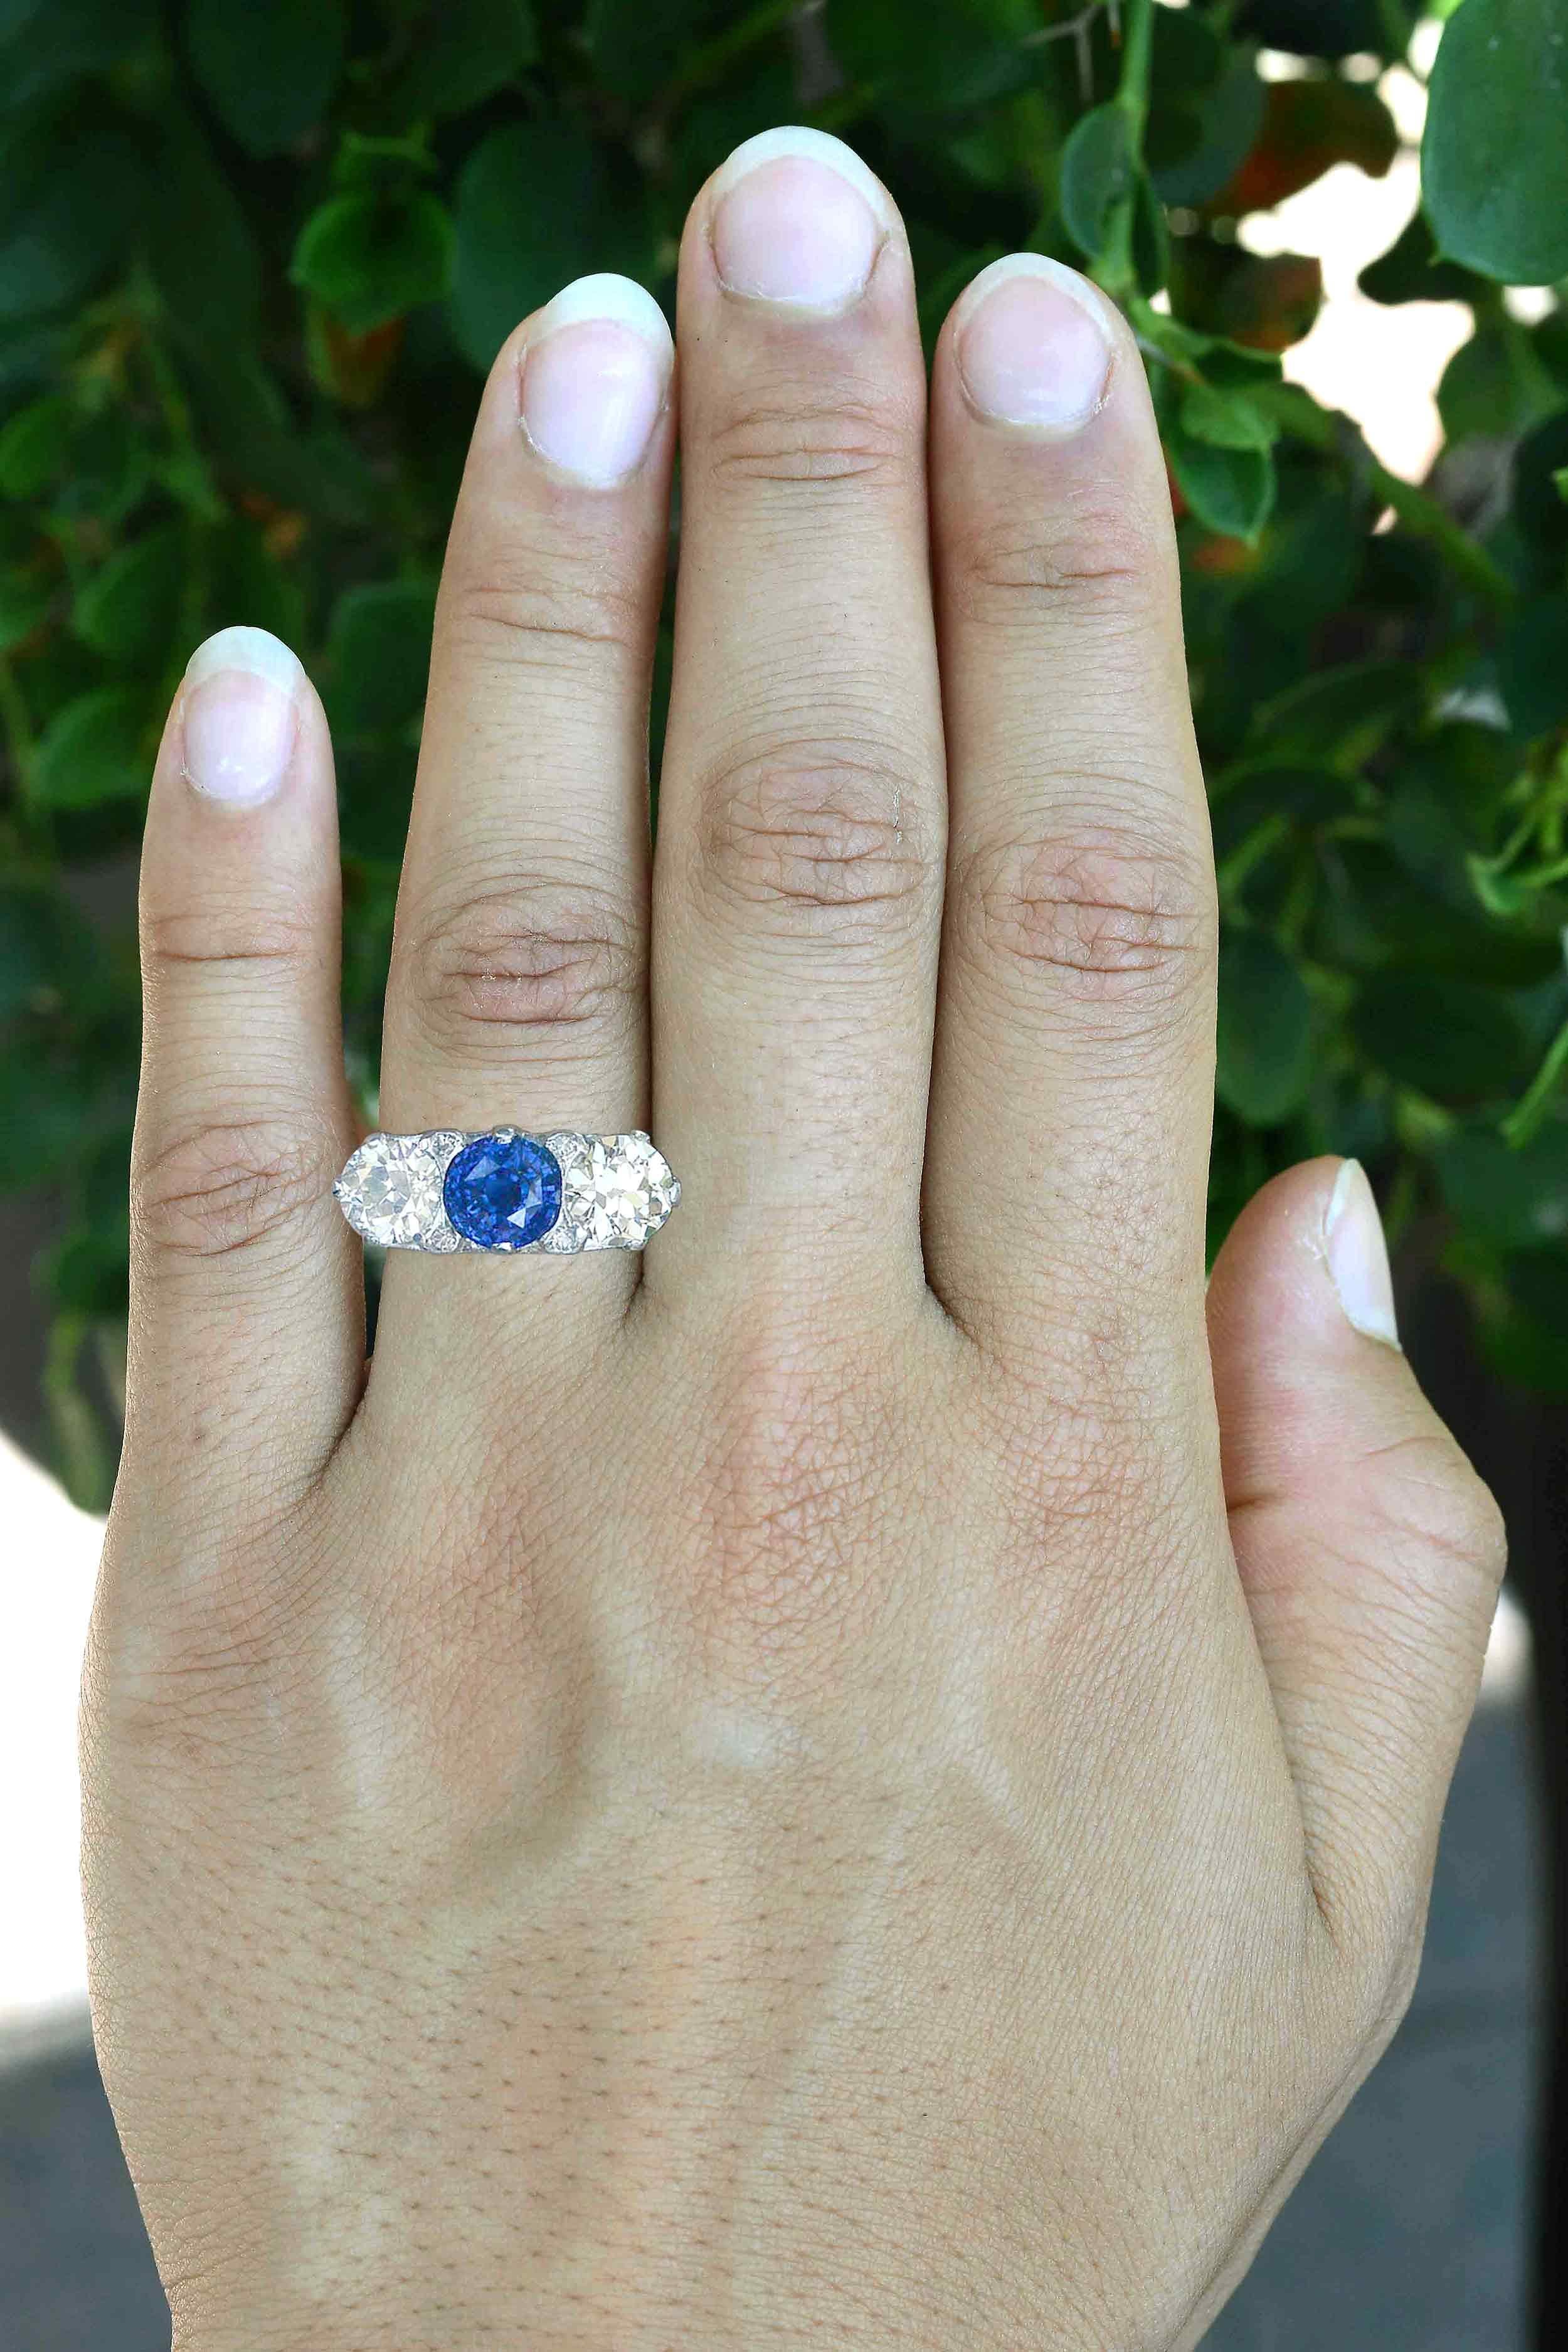 A magnificent antique sapphire and diamond 3 stone engagement ring.  Boasting a pair of gloriously brilliant old European cut diamonds, together weighing nearly 3 carats, centered by a velvety blue natural sapphire caressed in an amazing filigree